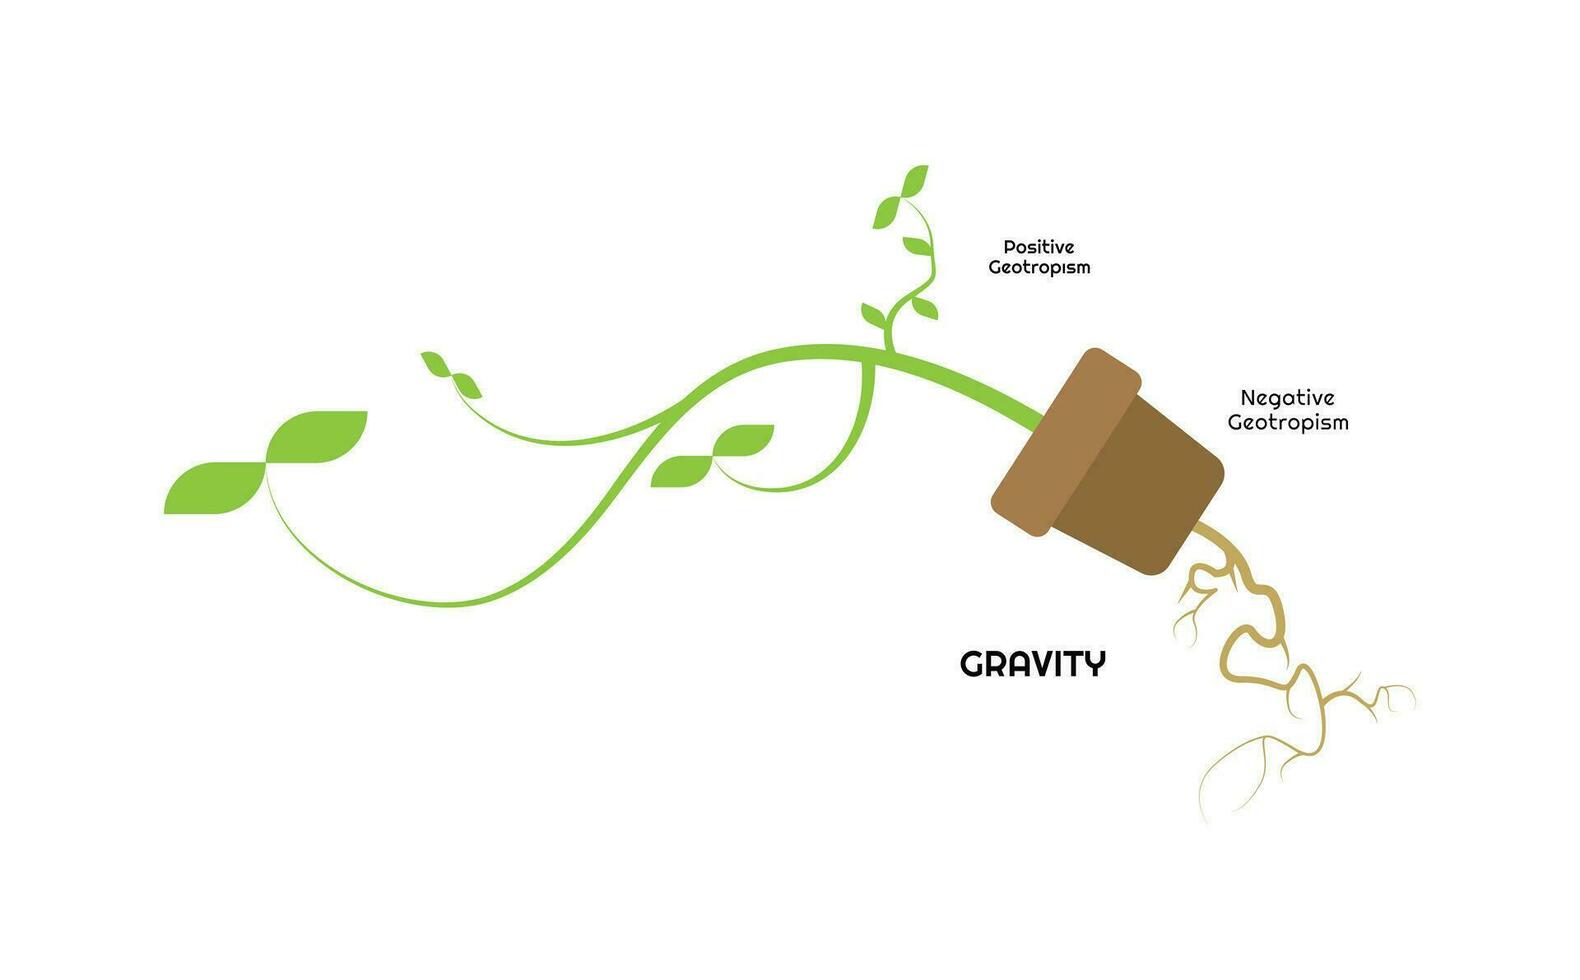 Scientific Designing of Geotropism Gravitropism Process. The Plant Differential Growth in Response to Gravity. vector